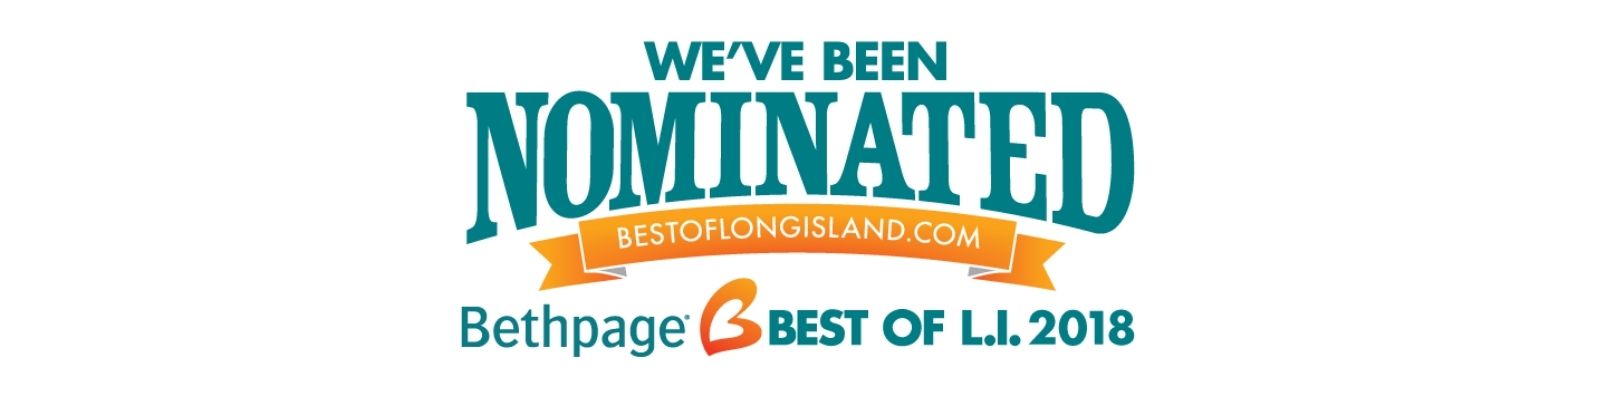 We Have Been Nominated for Best of Long Island 2018